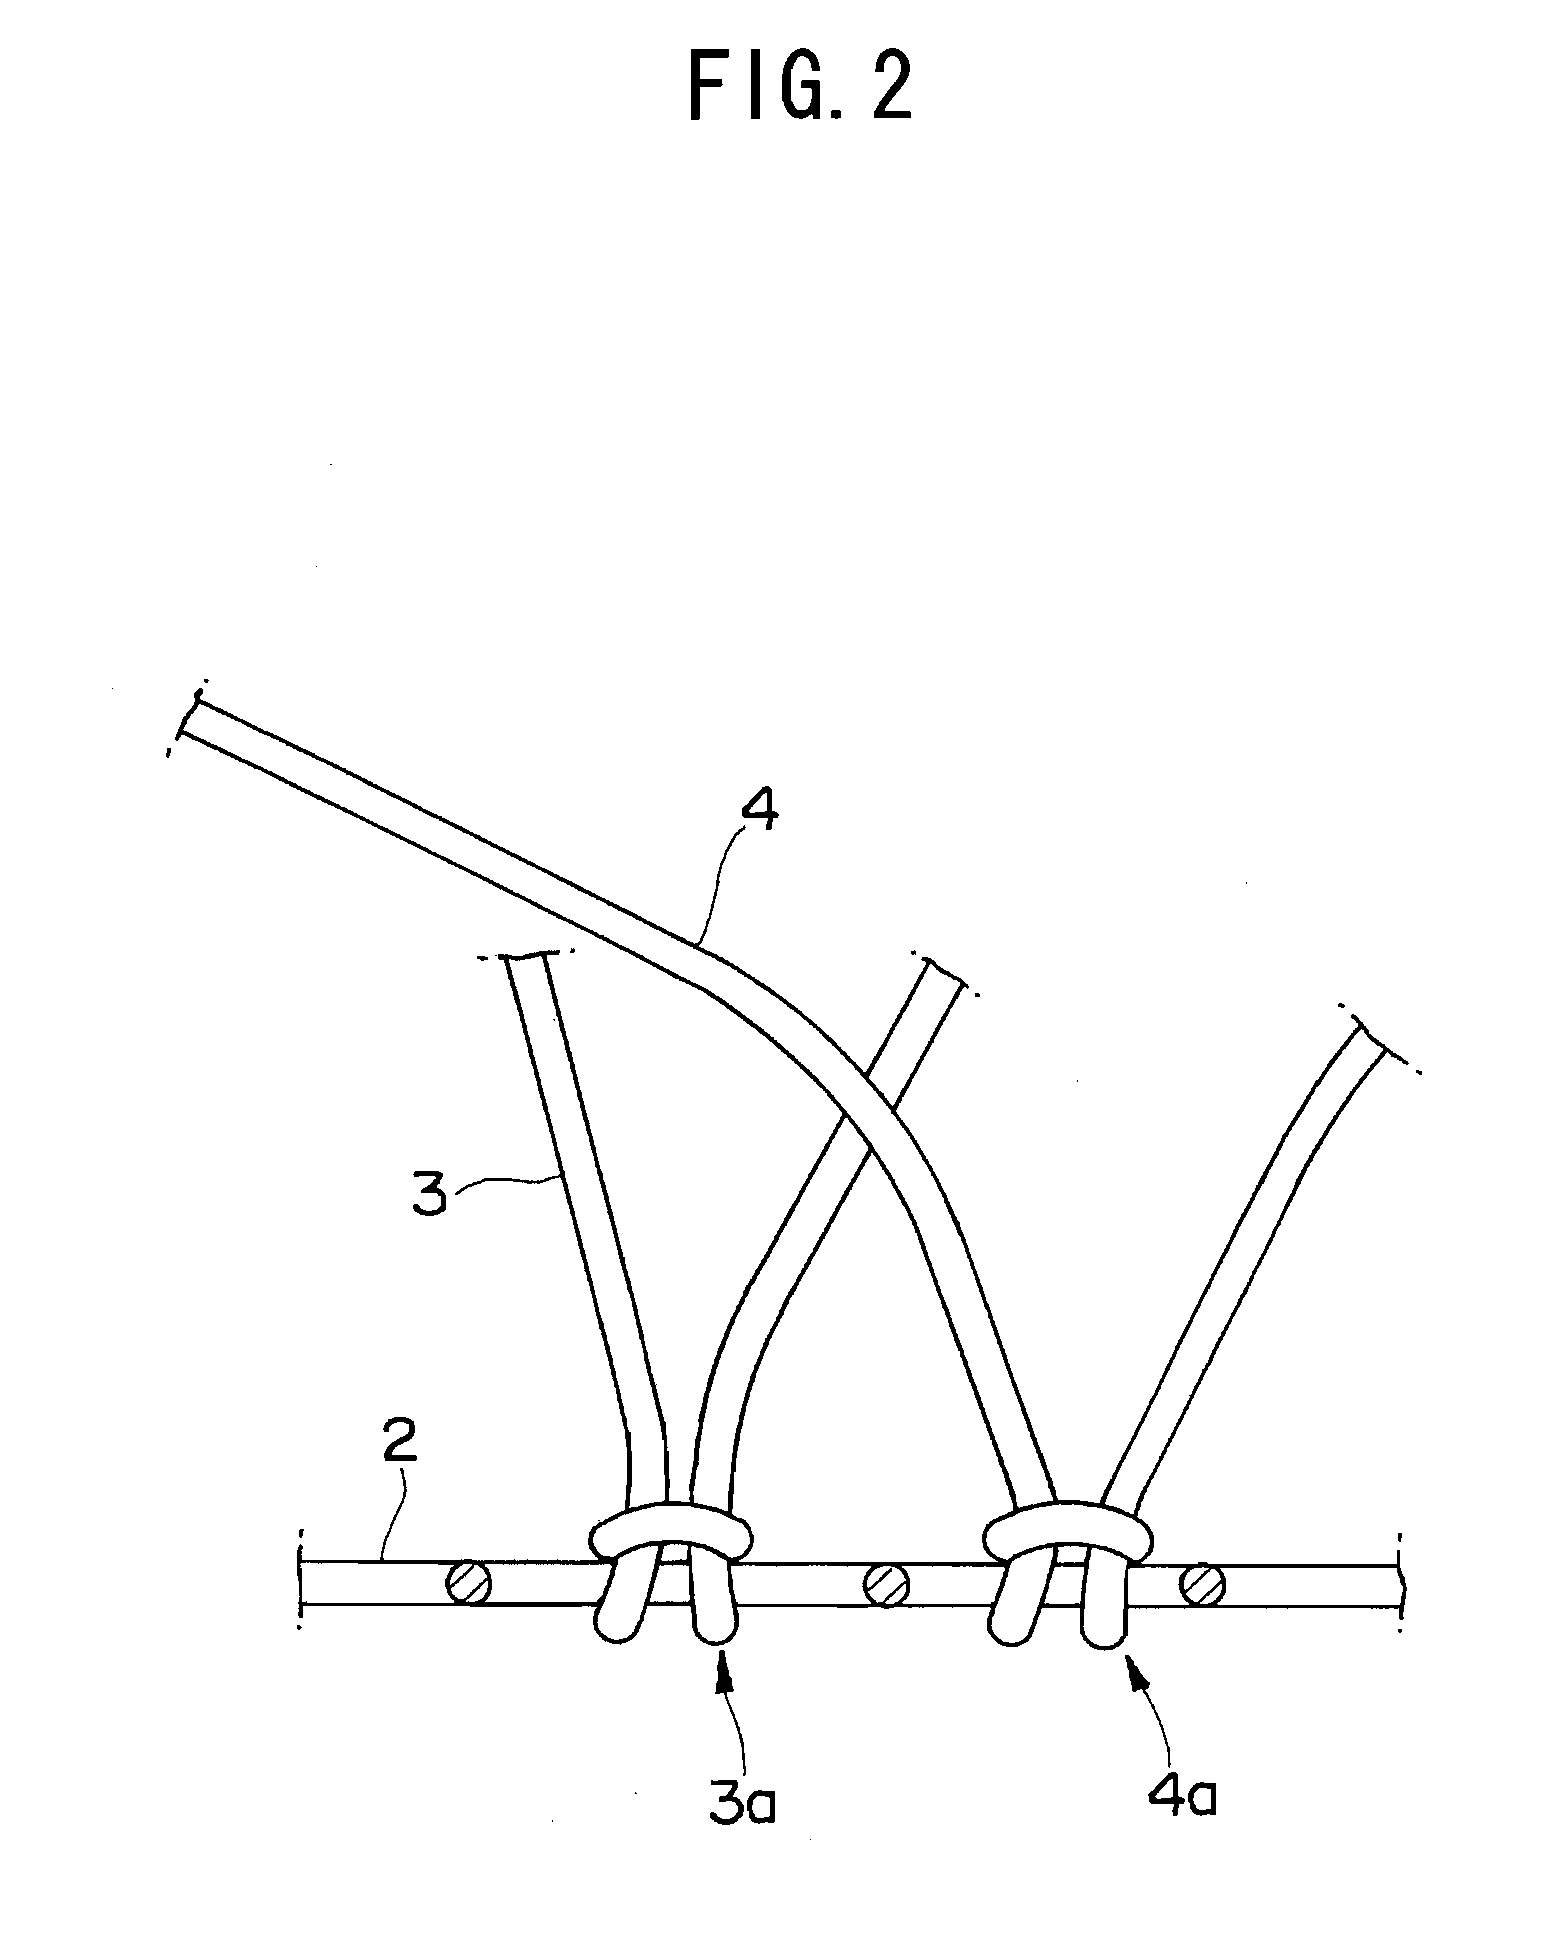 Wig and Method of Manufacturing the Same